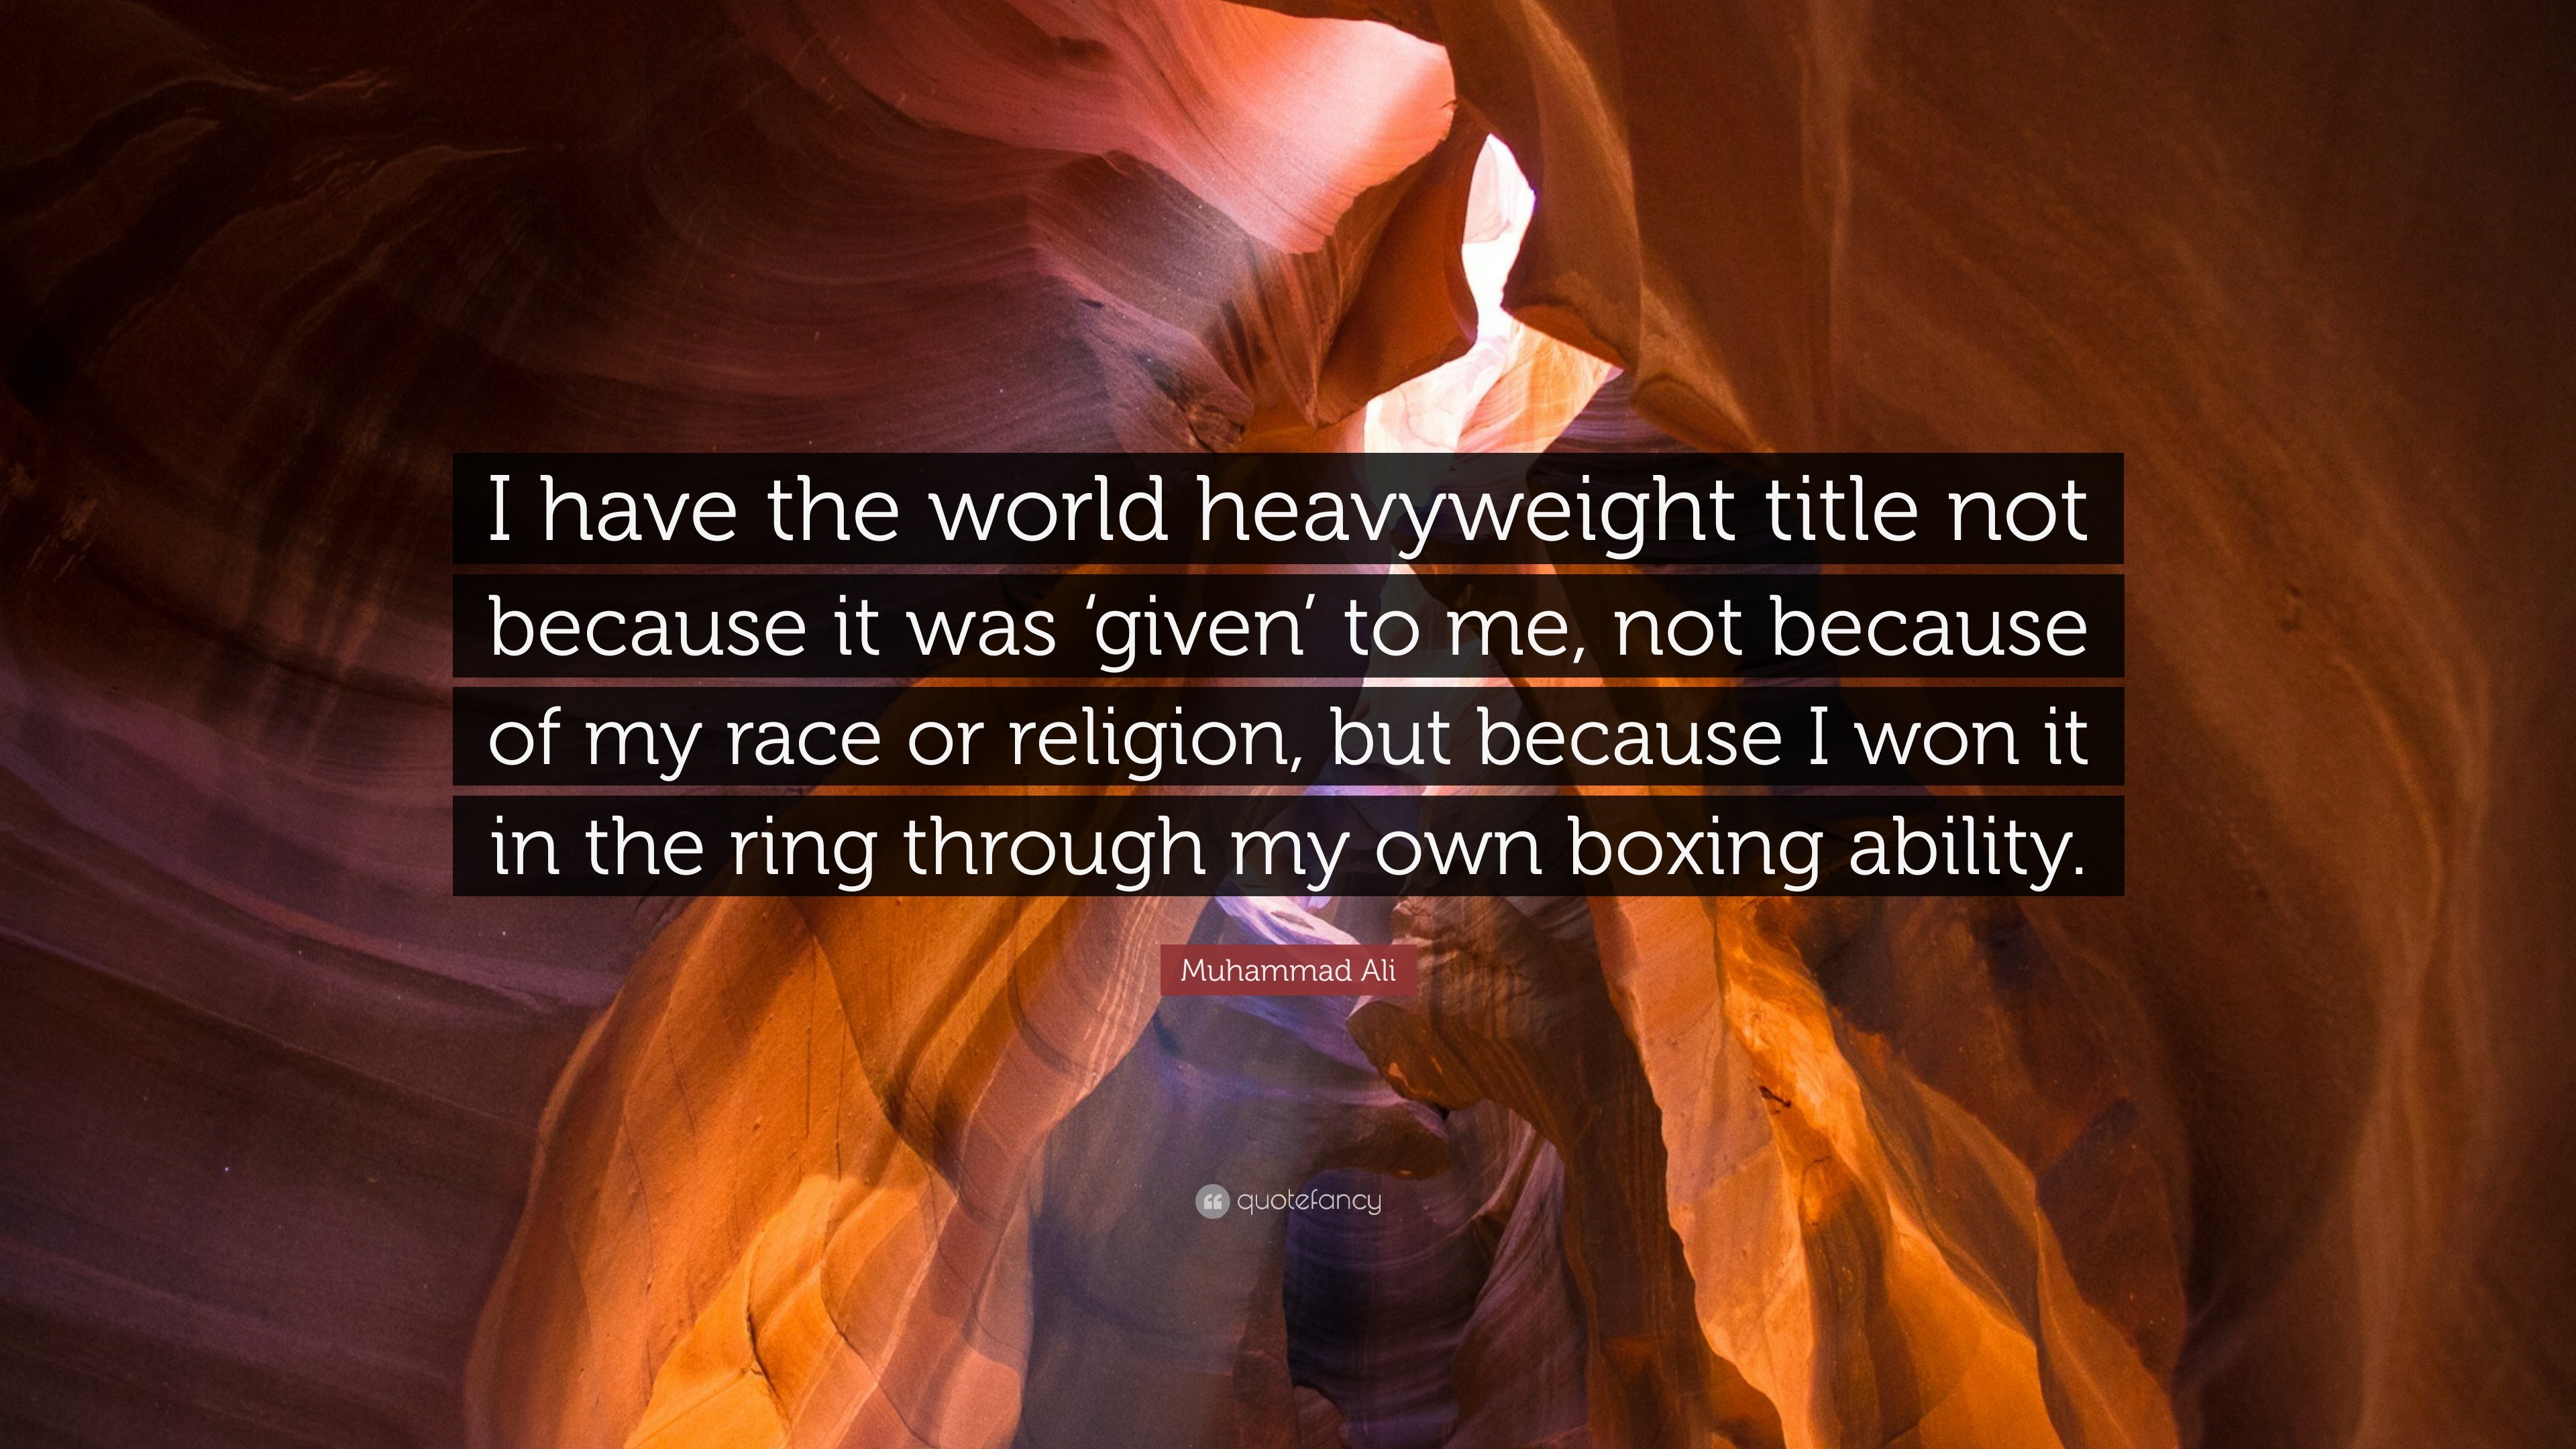 Muhammad Ali quote: I'm the most recognised and loved man that